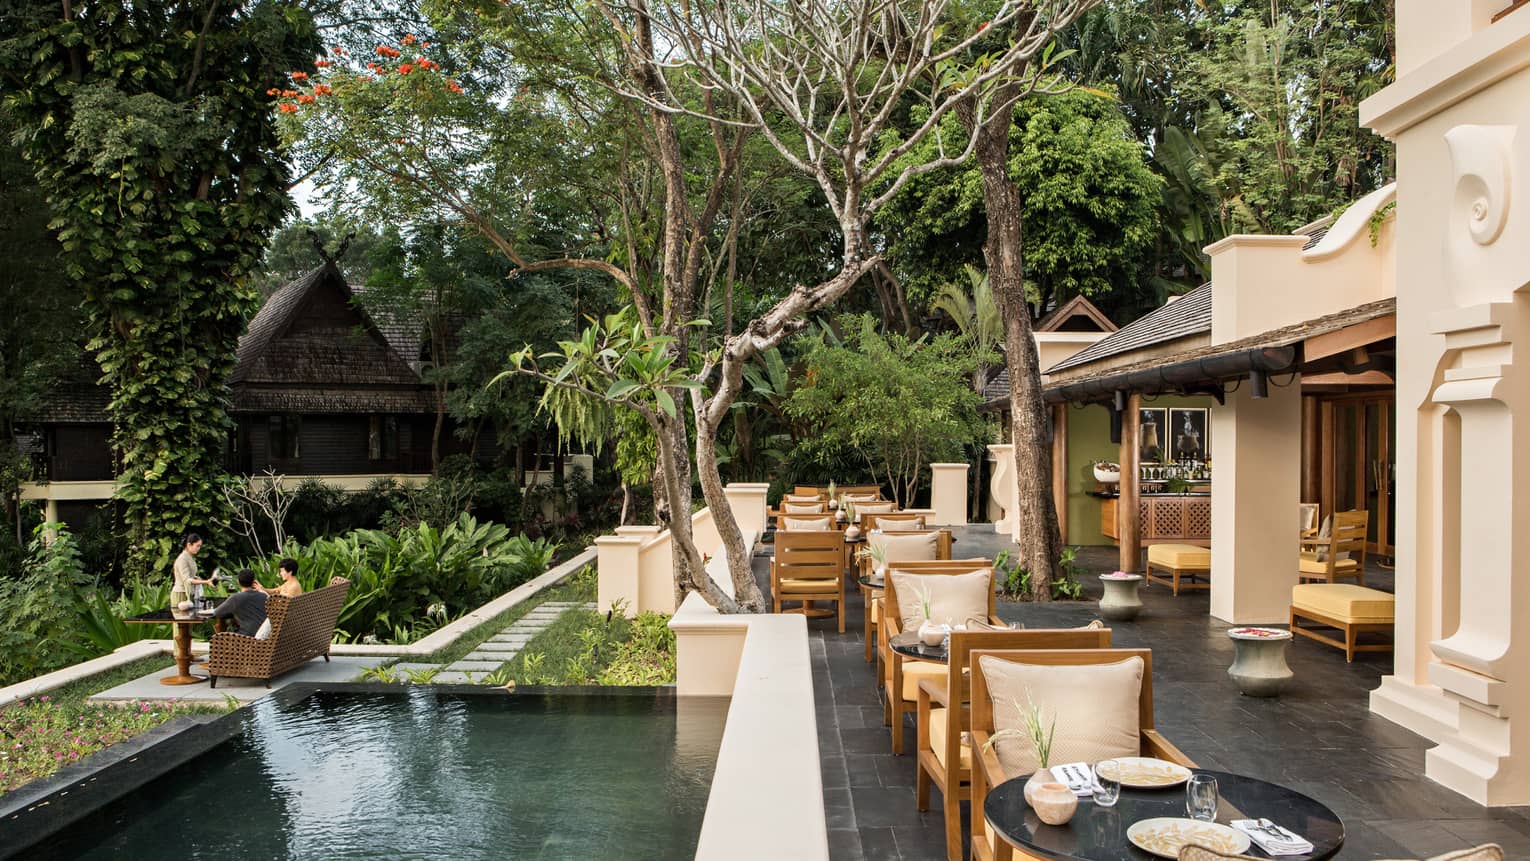 KHAO slate patio under shade of trees, long fountain by dining tables near large white columns